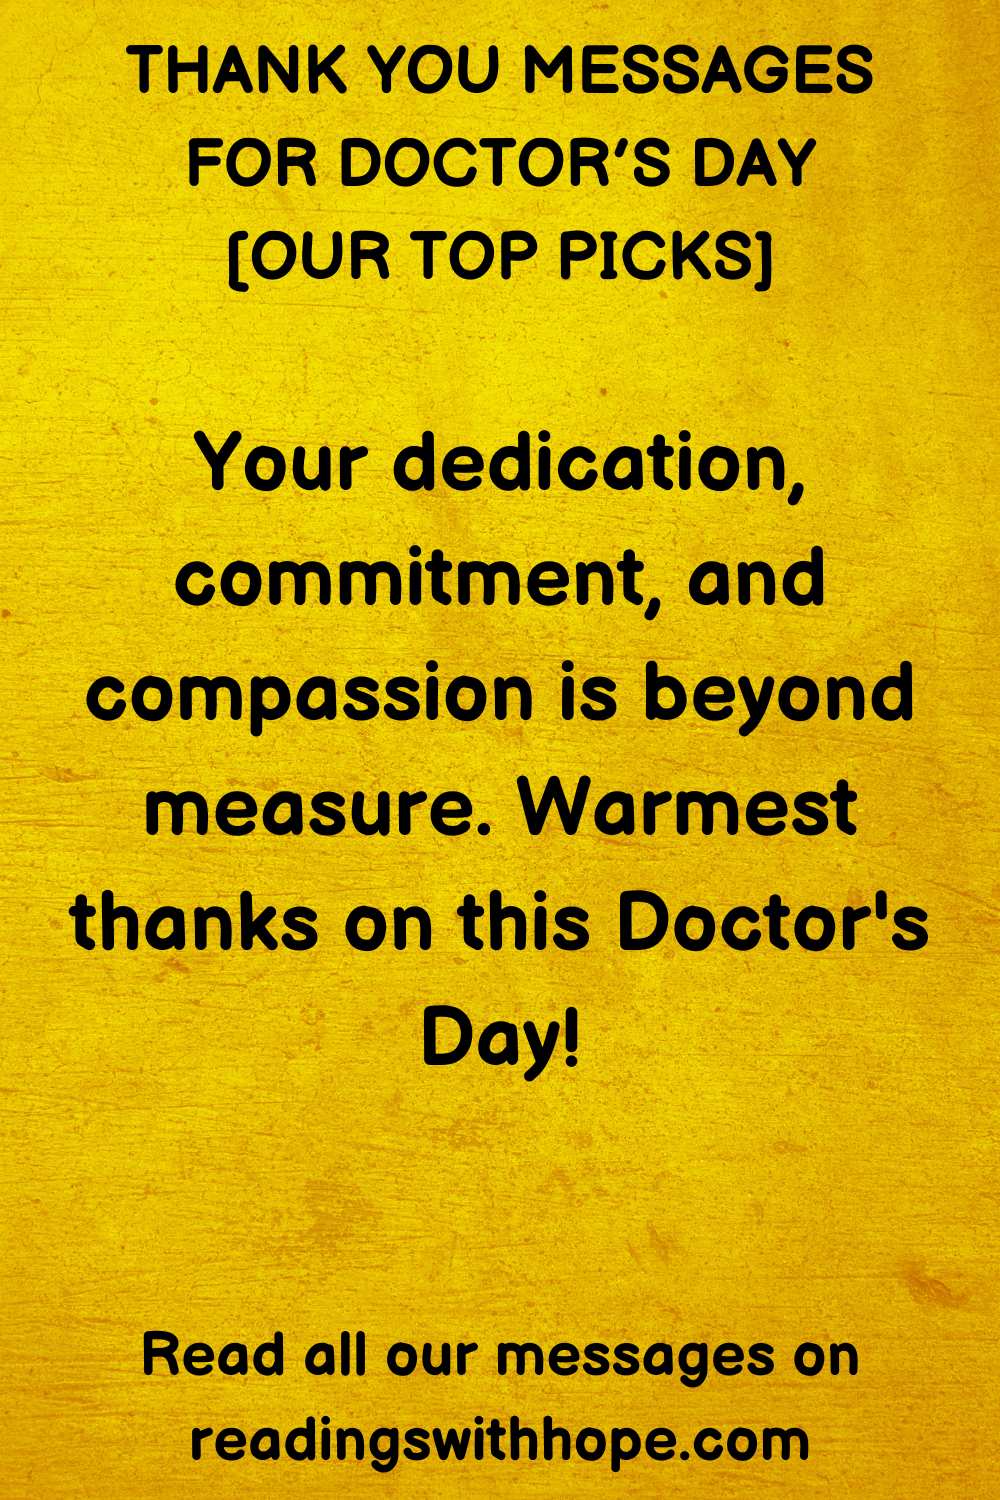 Thank You Messages for Doctor’s Day
